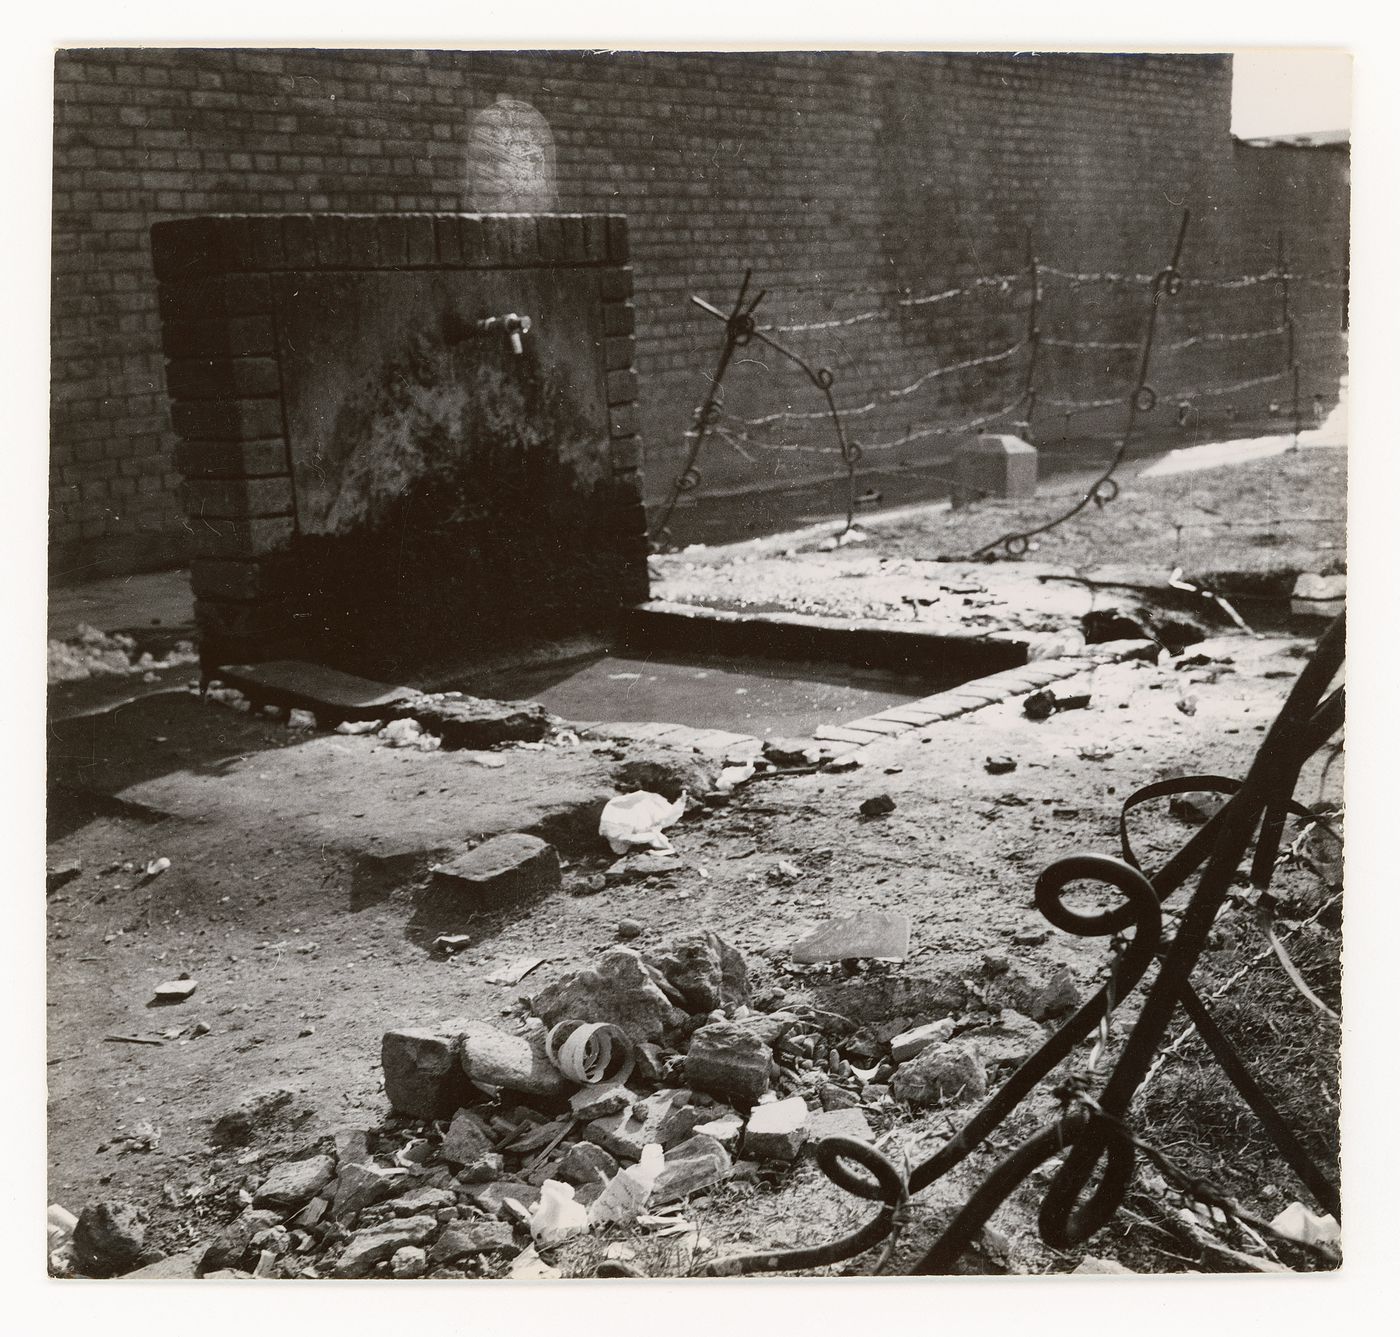 View of public water point with barbed wire fence in front of brick wall during construction of Chandigarh, India